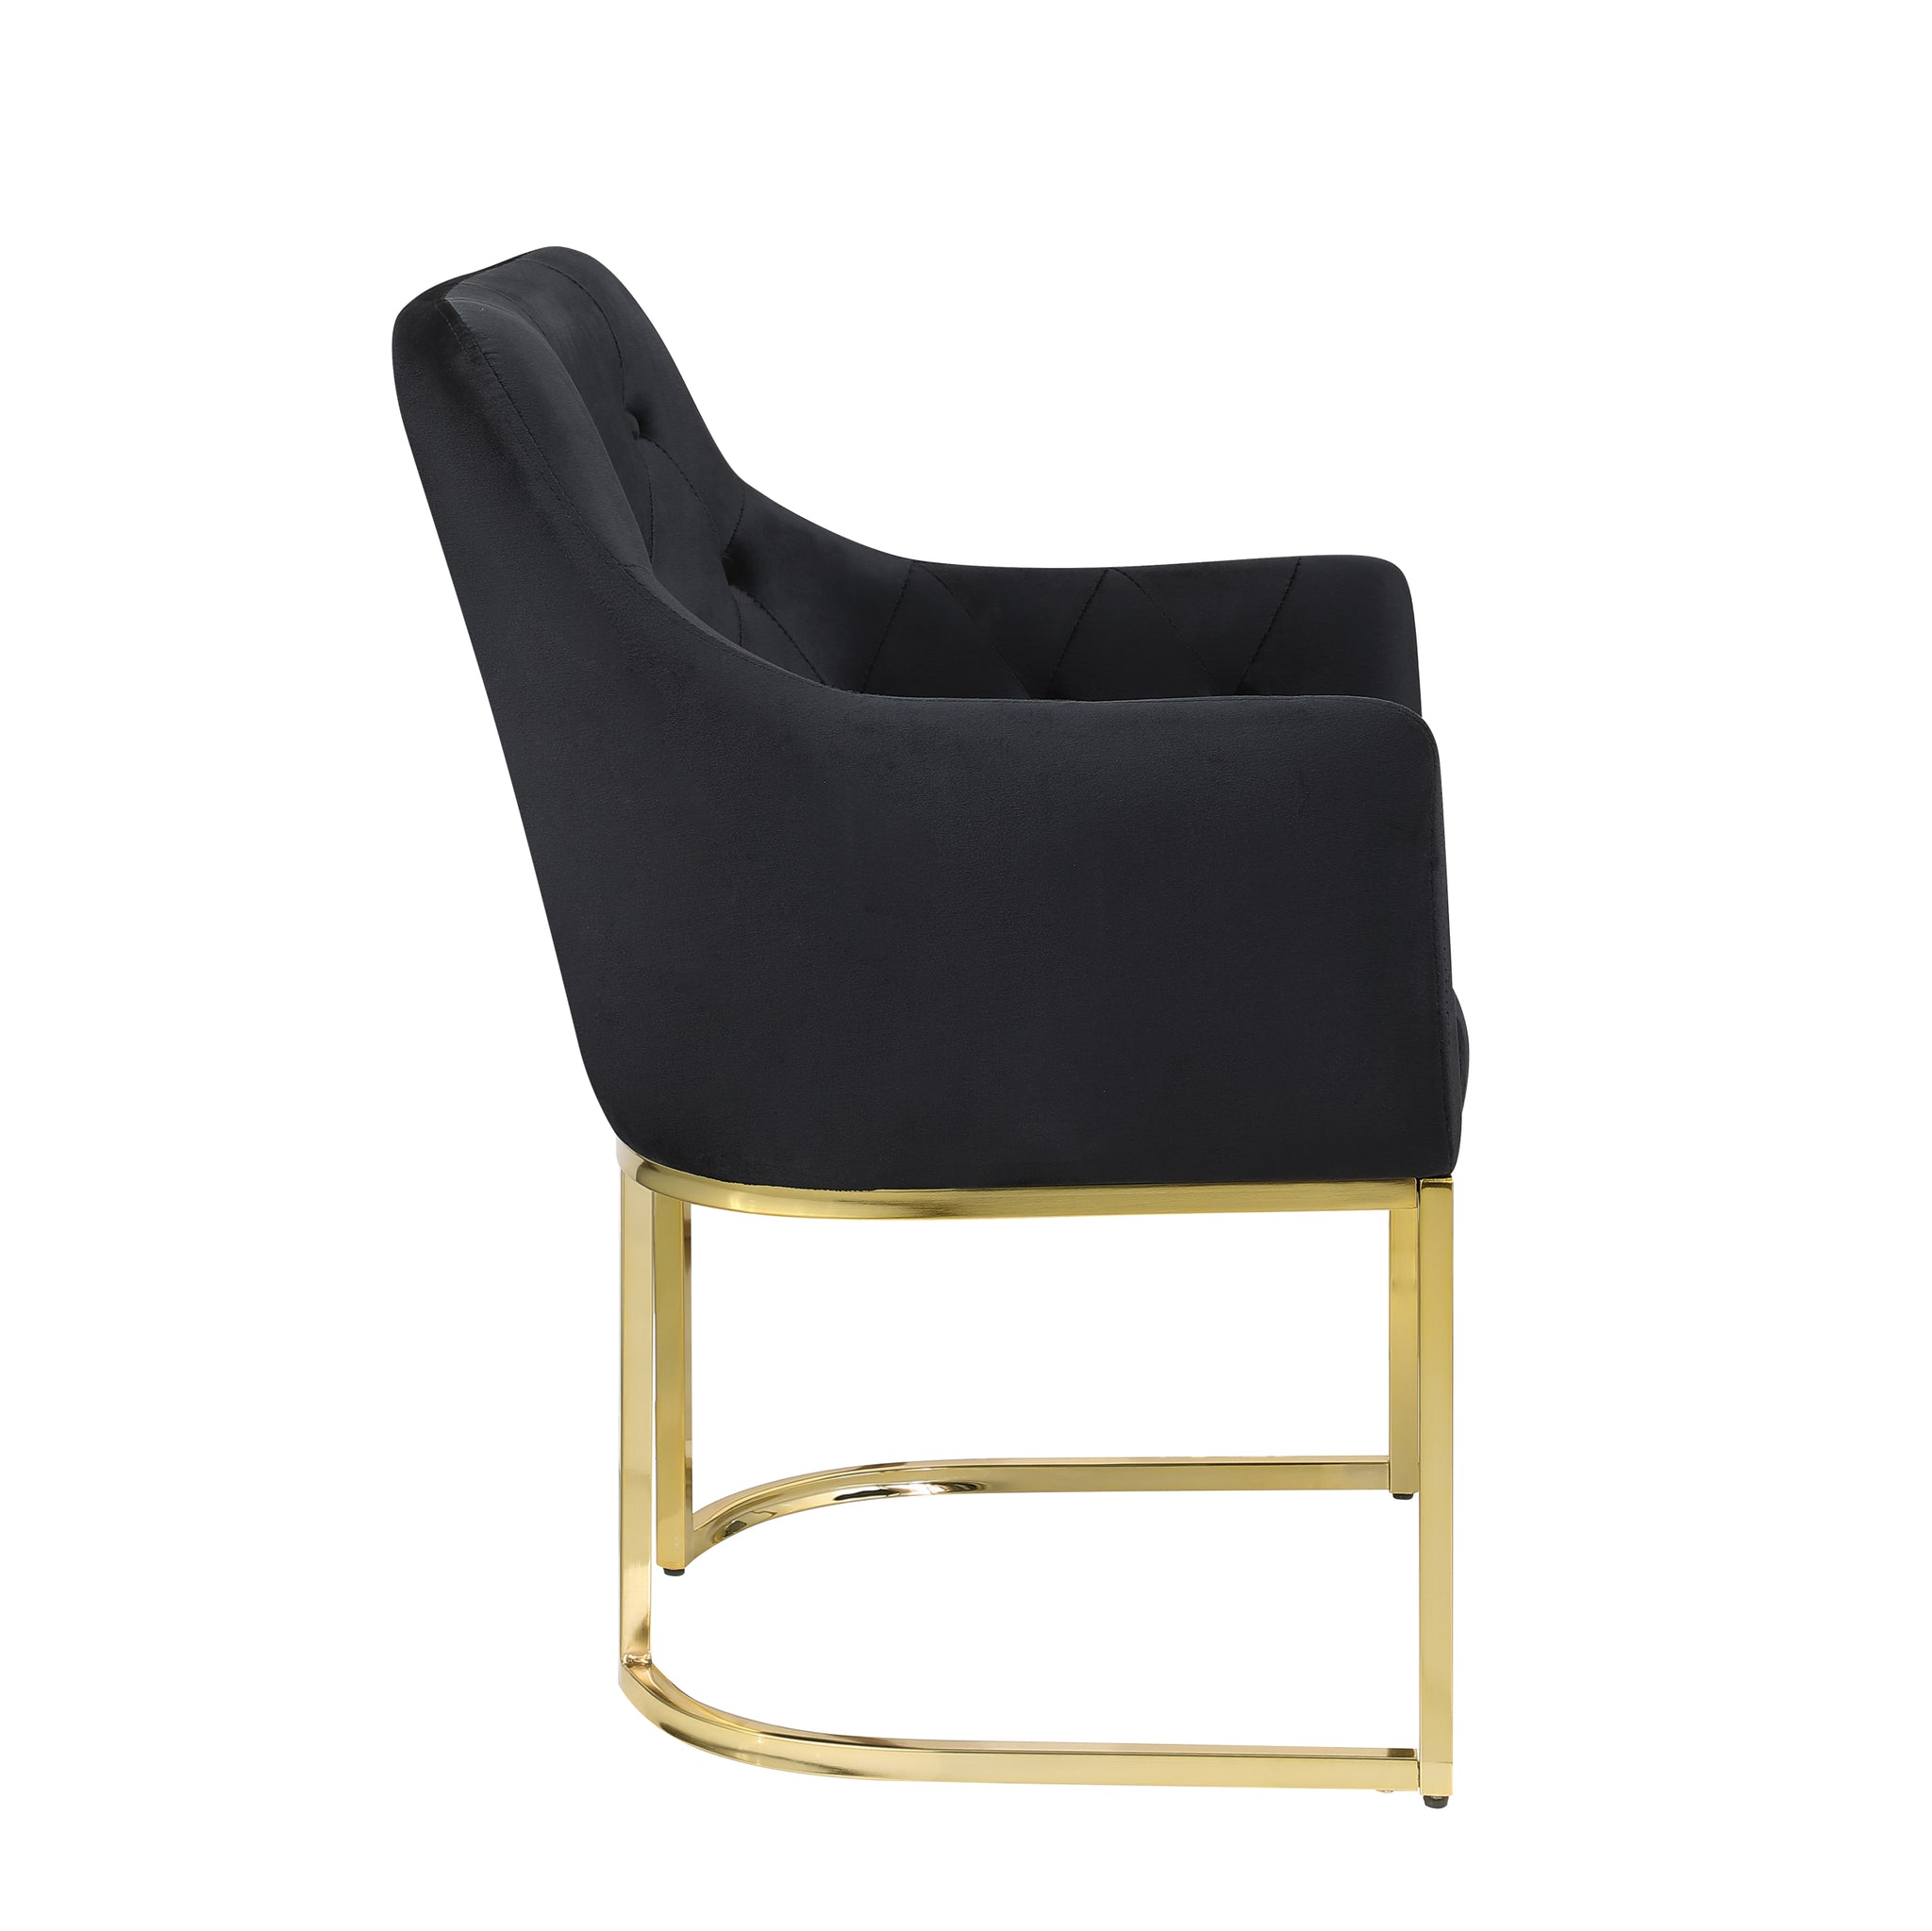 LOZENGE PLAID GOLD BASE ACCENT CHAIR black-primary living